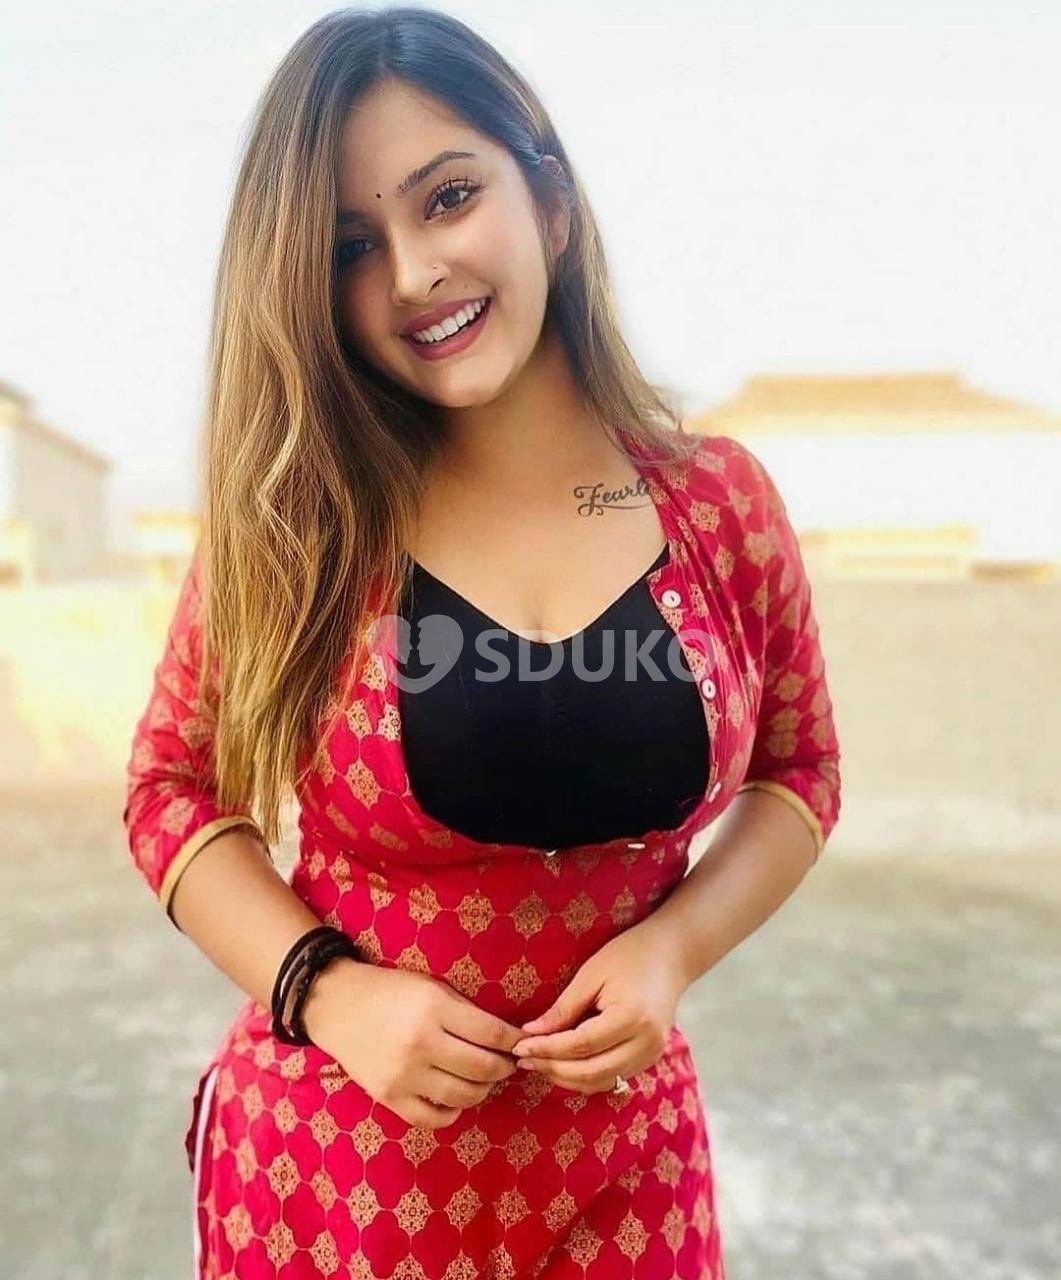 MY SELF KAVYA Dehradun best**.. CALL GIRL ESCORTS SERVICE IN/OUT VIP INDEPENDENT CALL GIRLS SERVICE ALL SEX ALLOW BOOK L